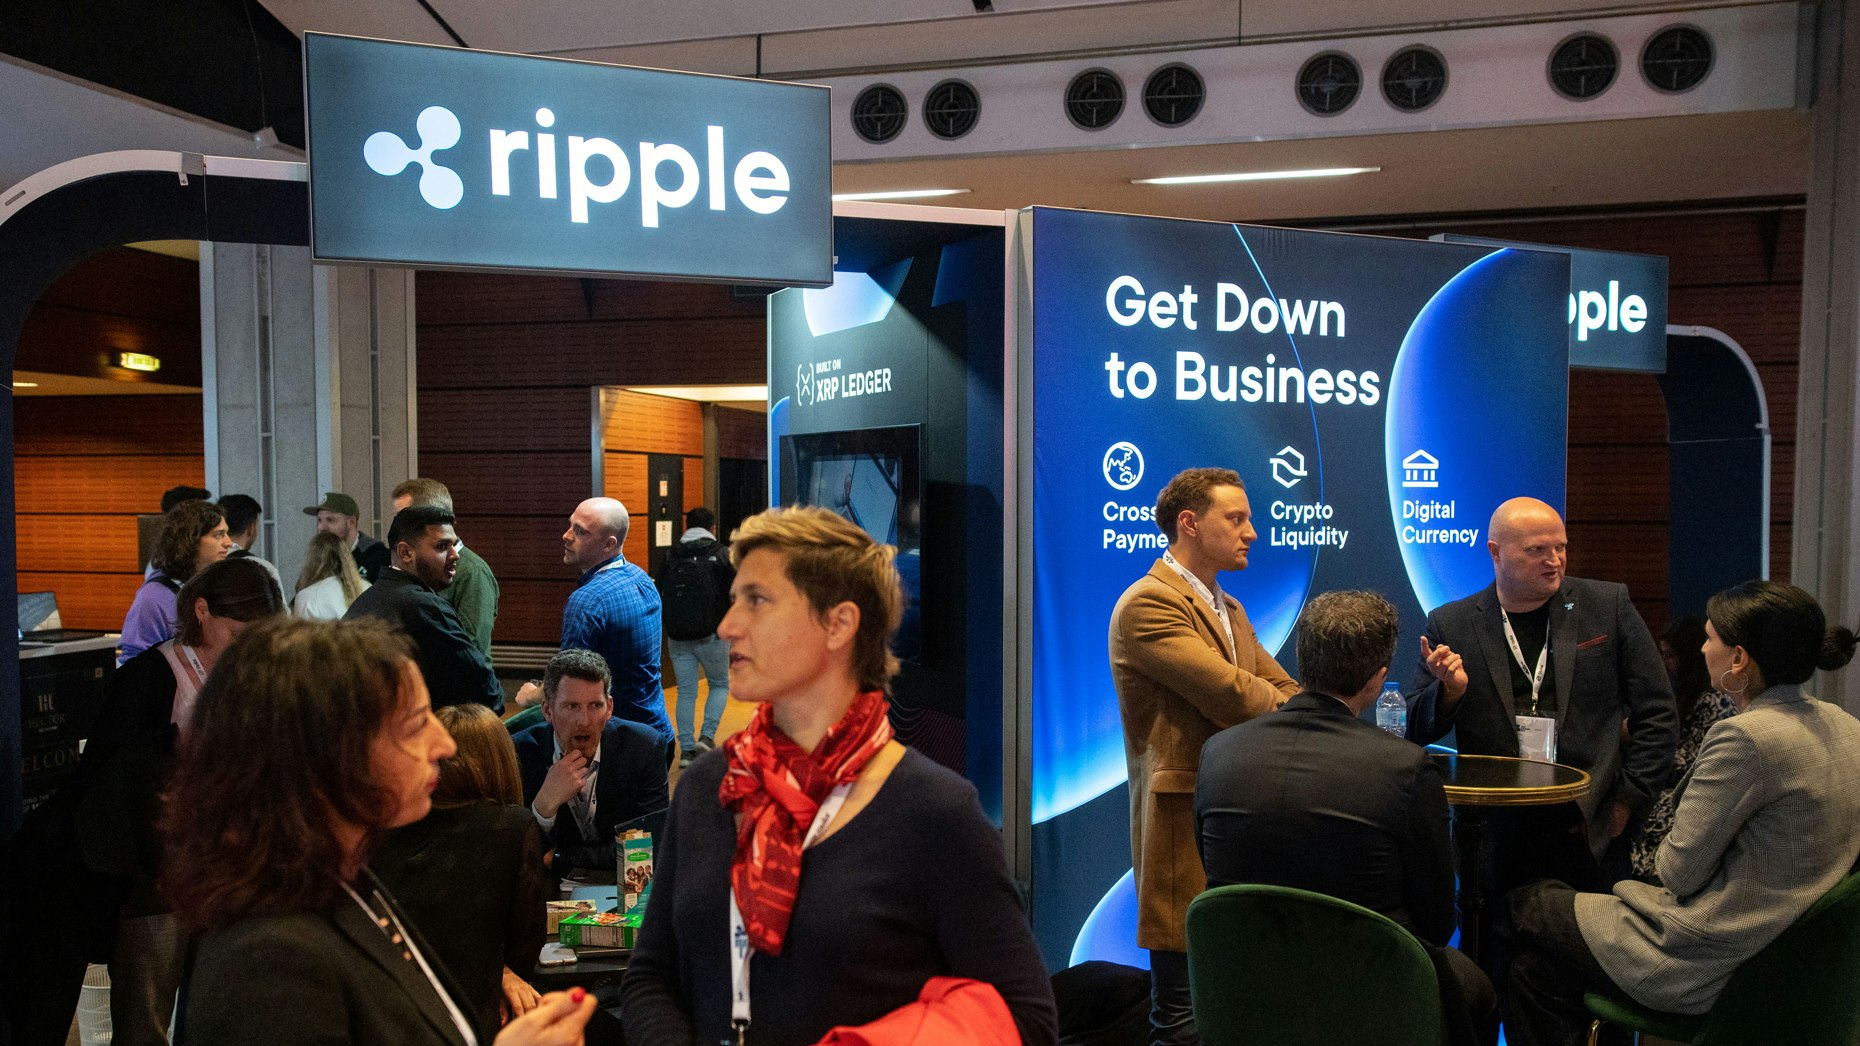 Ripple Swell Event What to Expect on Nov 8th-9th